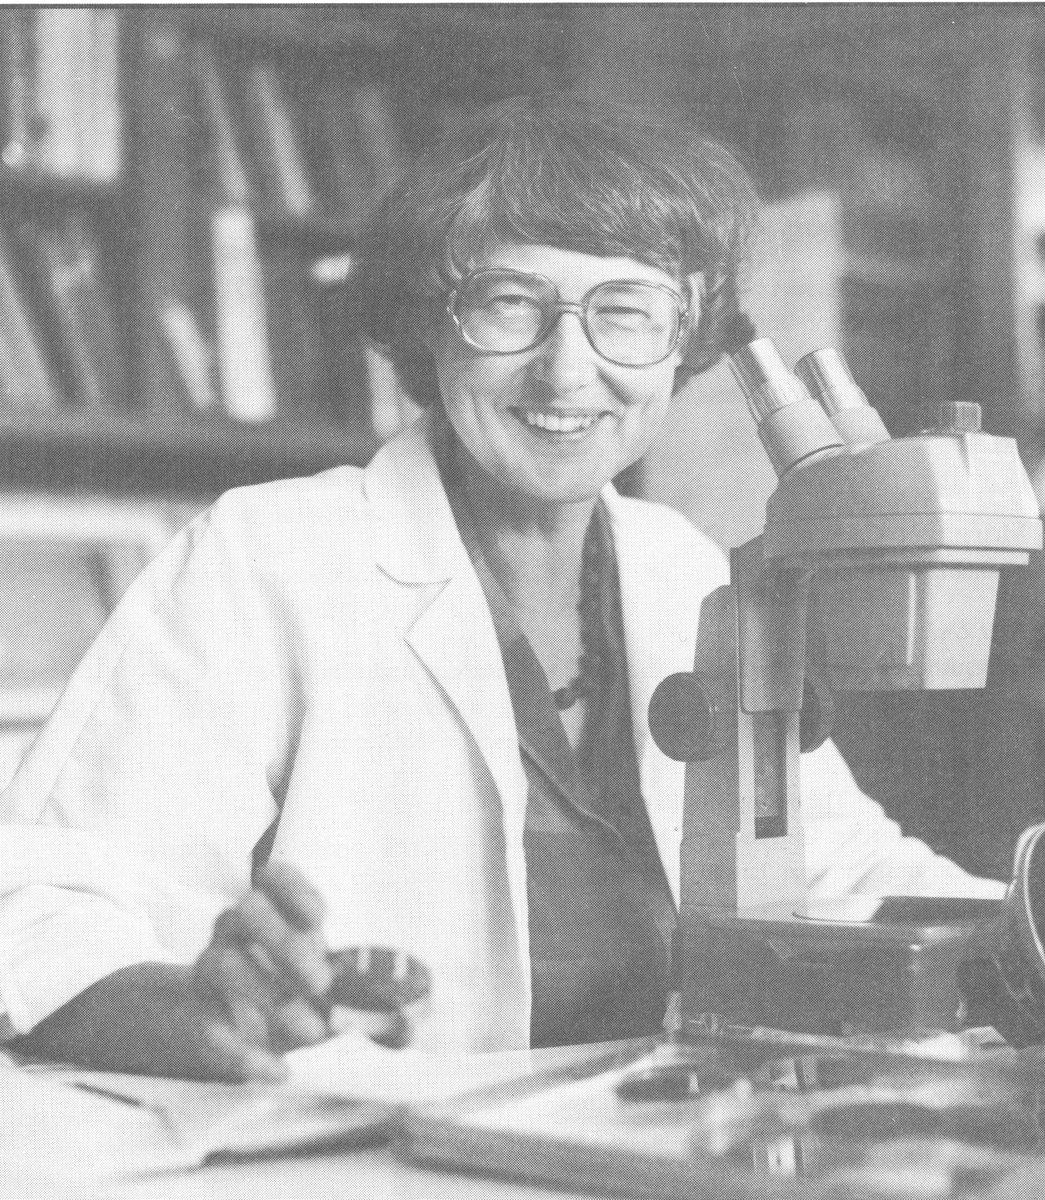 Happy #WomensHistoryMonth! Dr. Janet Hartley spent her career @NIAIDNews identifying how certain viruses cause cancer. Check out her 1995 interview with former @theNCI Director Dr. Carl Baker: bit.ly/48r4JB1.